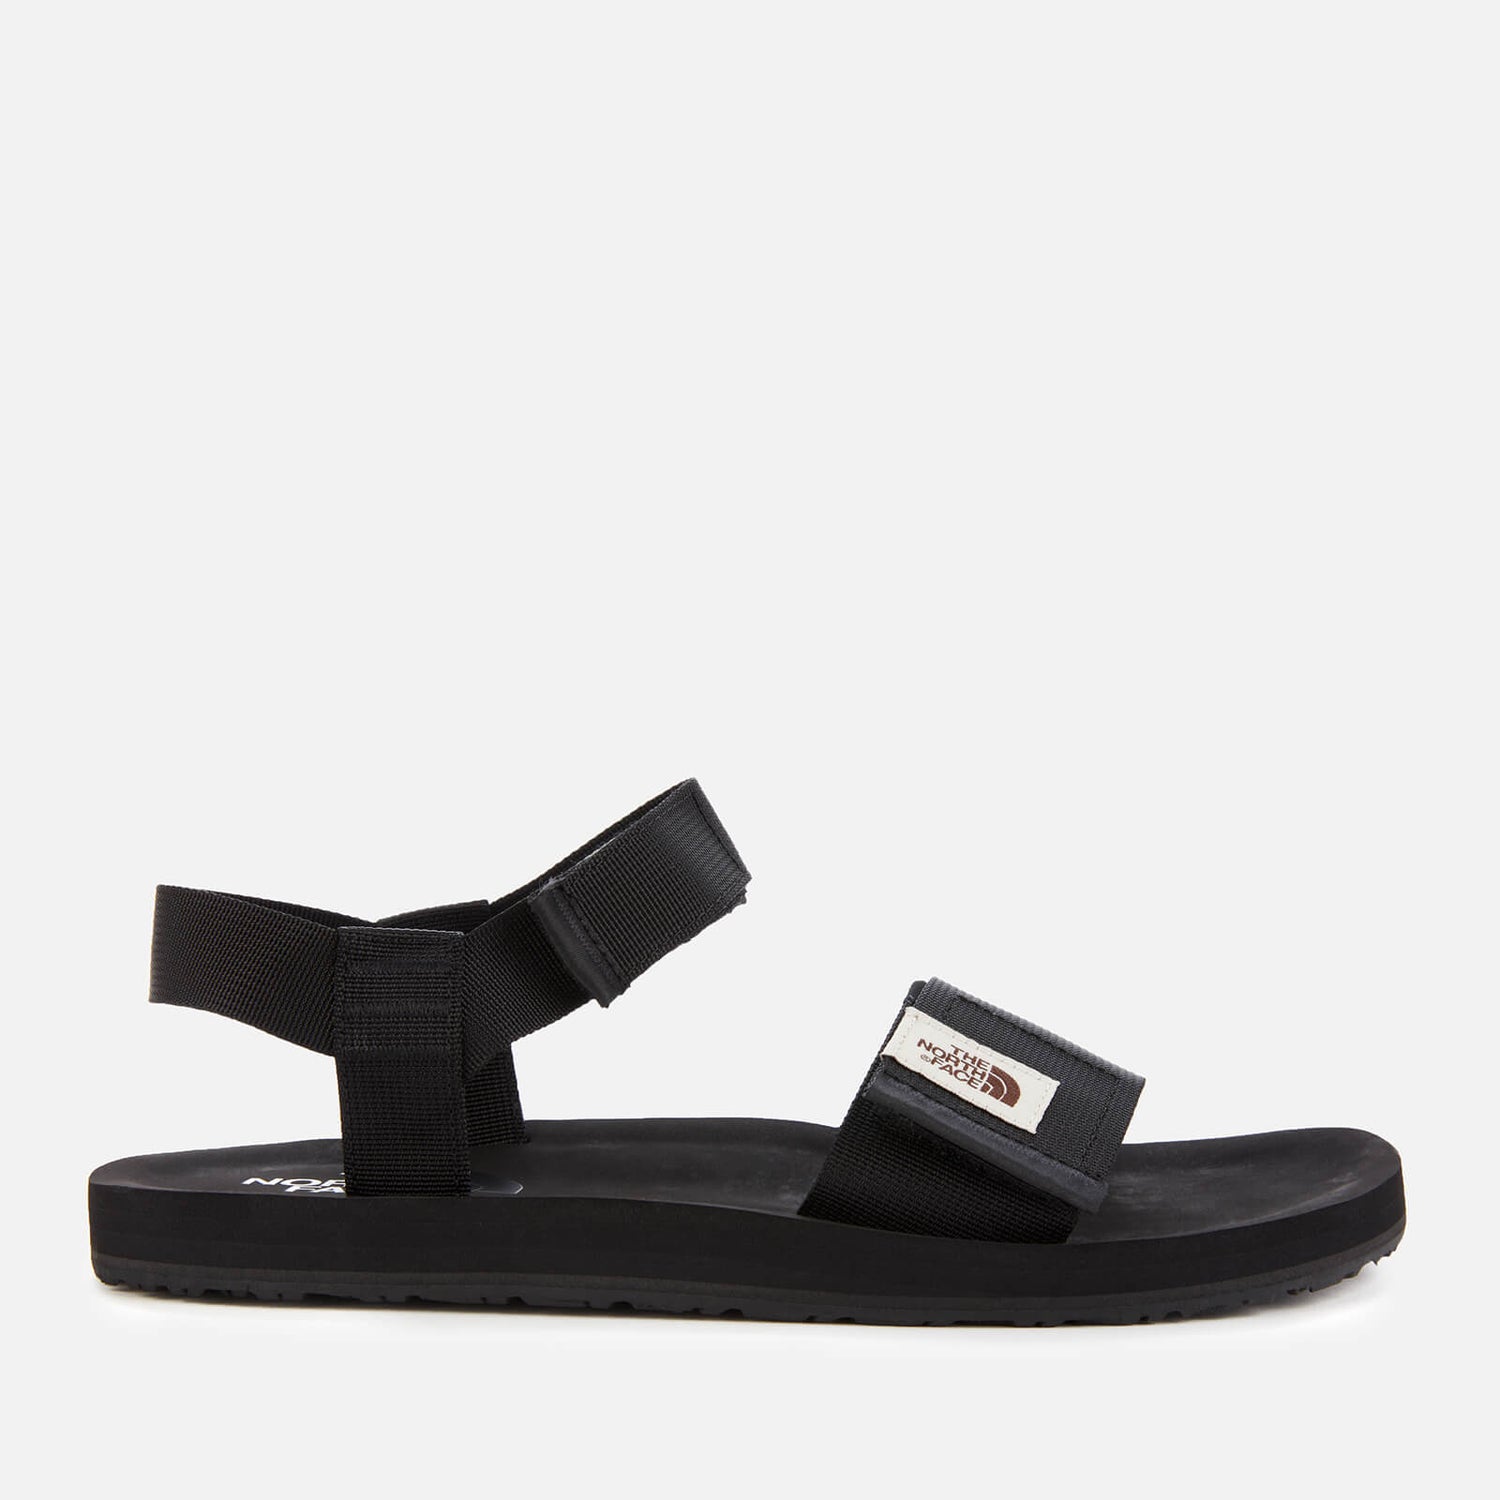 The North Face Men's Skeena Sandals - Black - Free UK Delivery Available